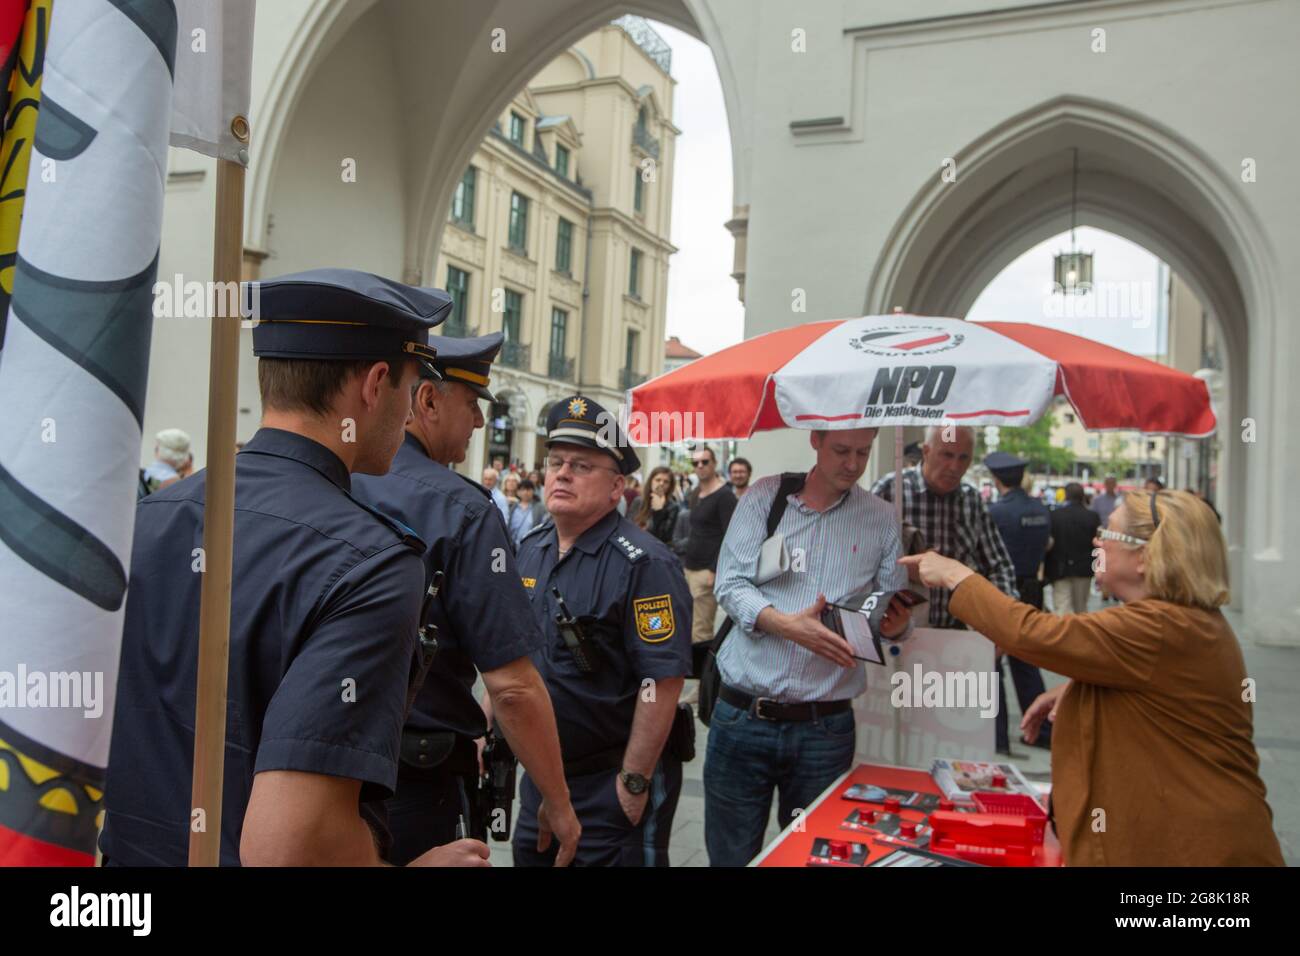 Munich, Germany. 25th May, 2019. Renate Wehrlberger discussing with police on a flyer reading ' Migration kills '. The supreme court judged it's not illegal. The neonazi party NPD had a stand in Munich for the upcoming European Elections. (Photo by Alexander Pohl/Sipa USA) Credit: Sipa USA/Alamy Live News Stock Photo